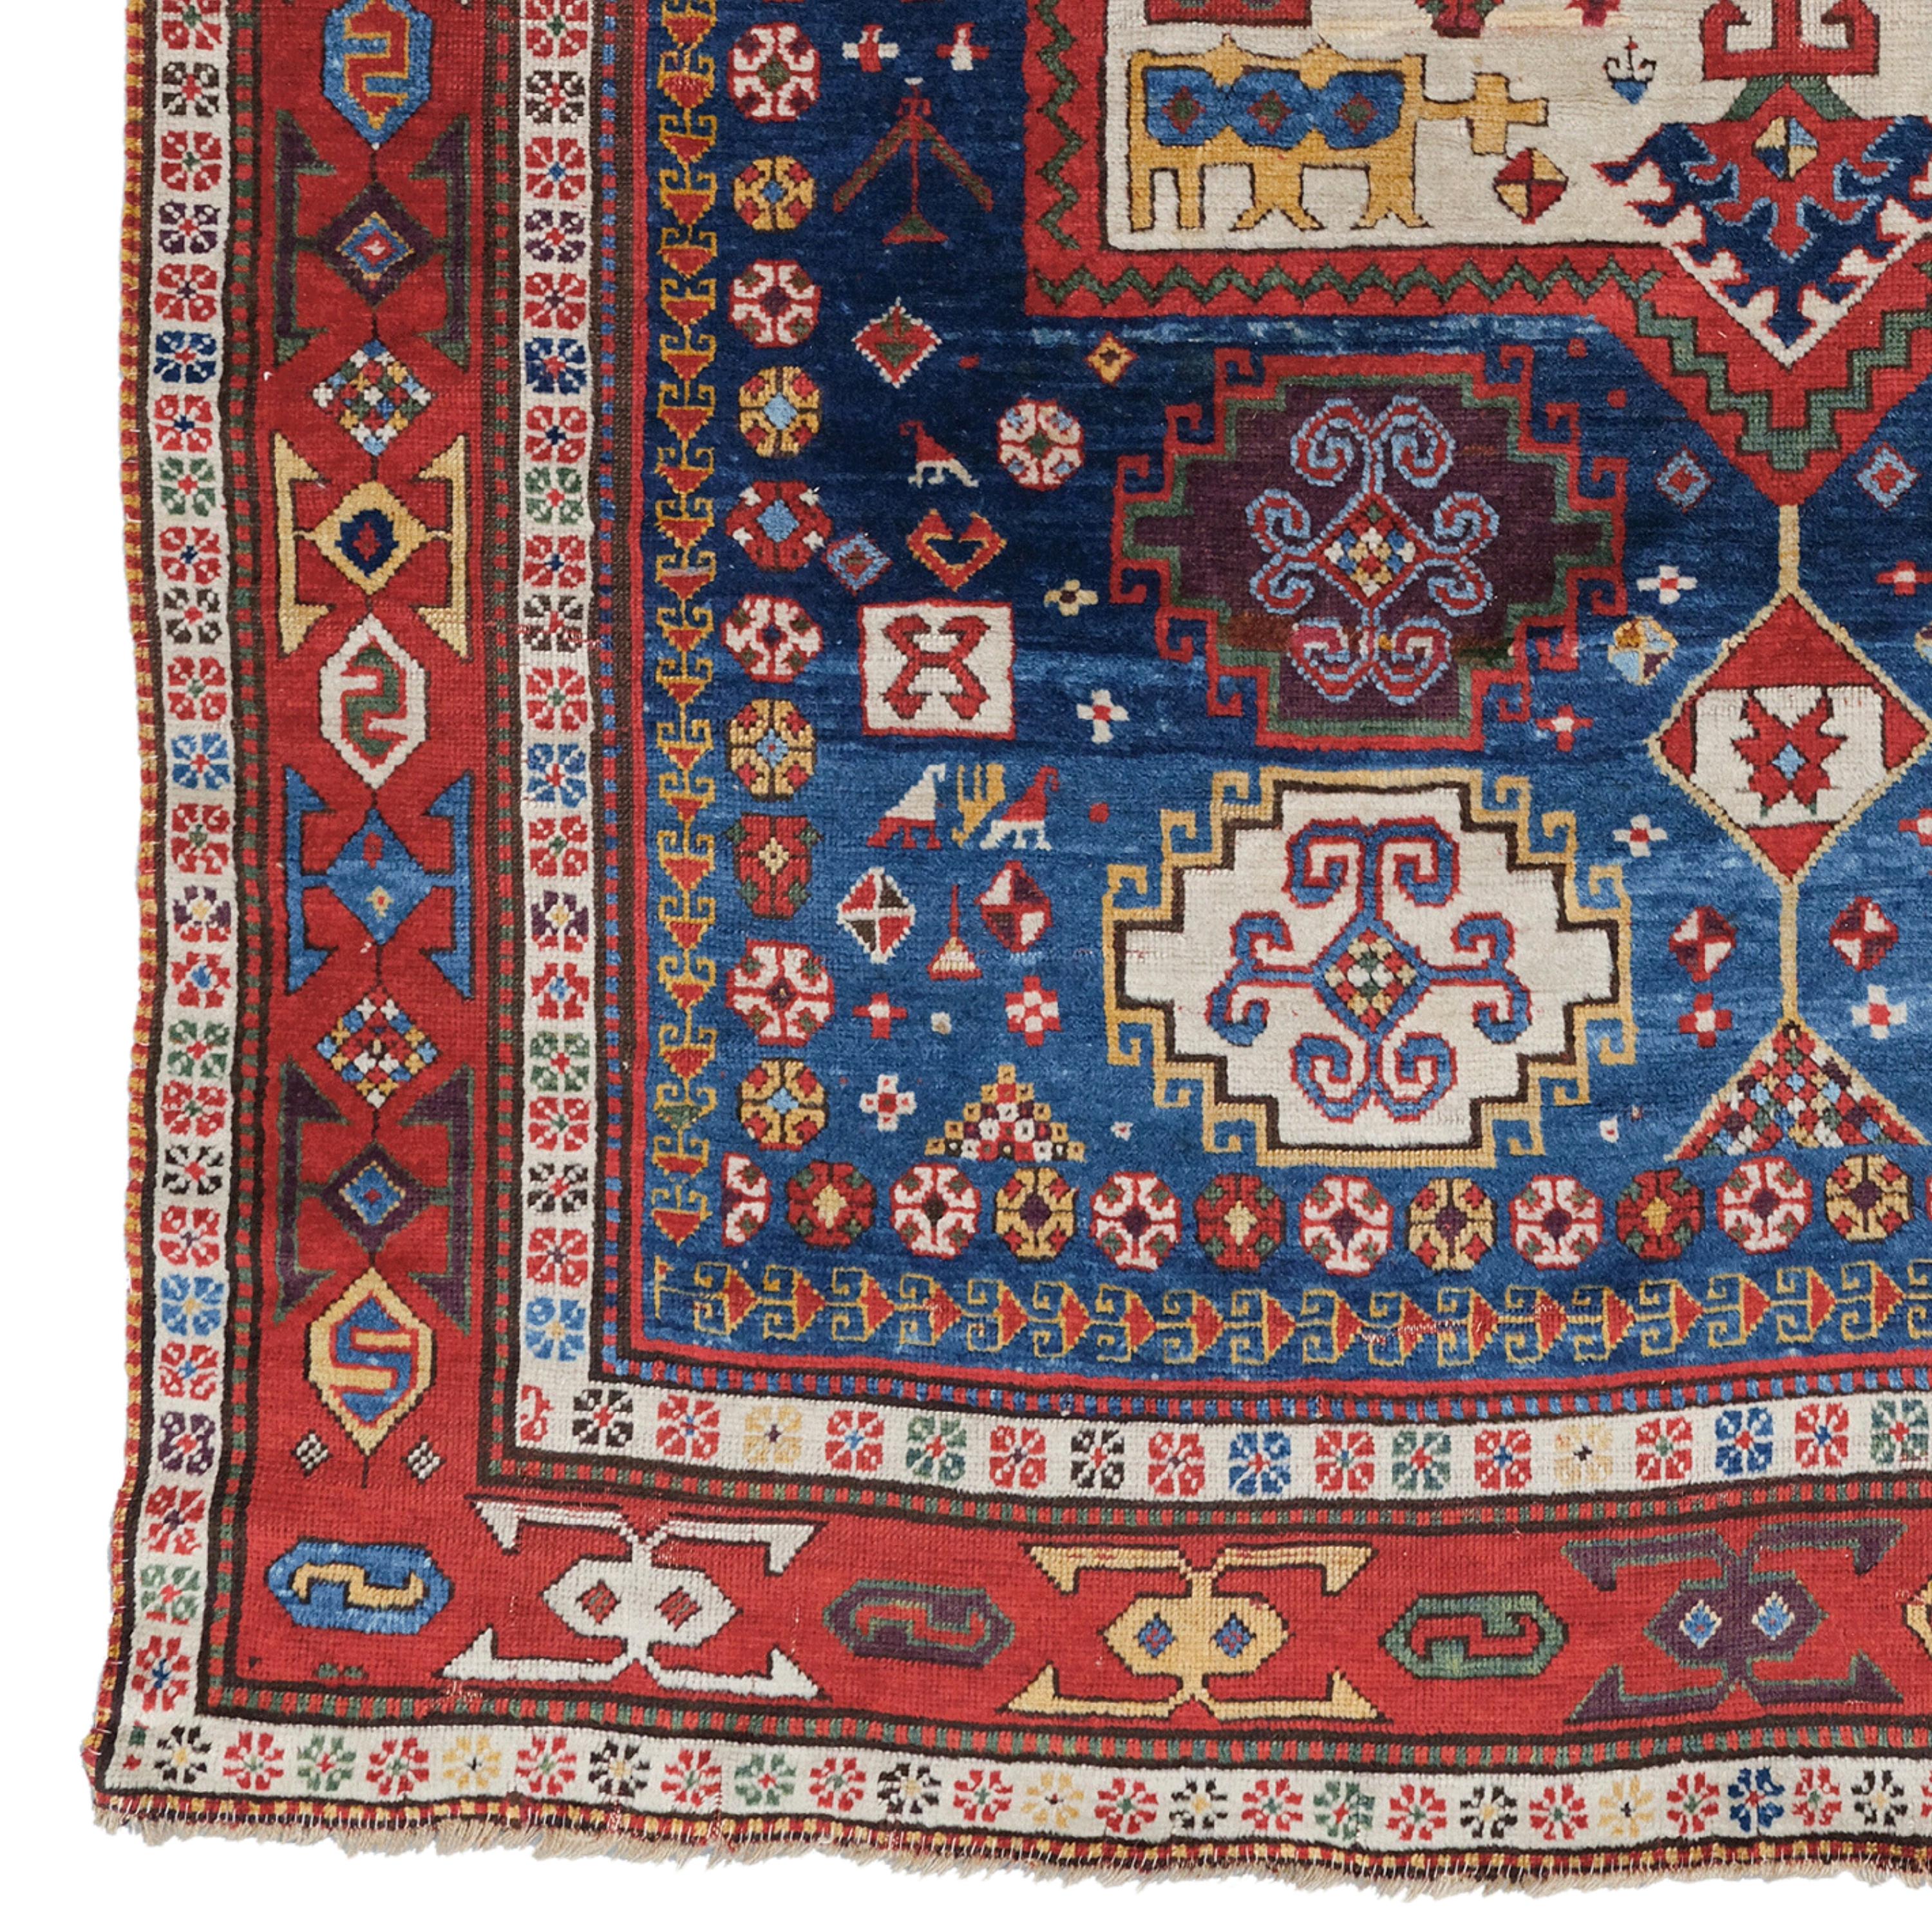 Rare Caucasian Rug  Caucasus Rug
Size: 176×224 cm

This wonderful rug is a formerly unpublished addition to a small and rare group of blue-ground Caucasian rugs whose design is dominated by a prominent decahedral gabled ivory medallion. The overall